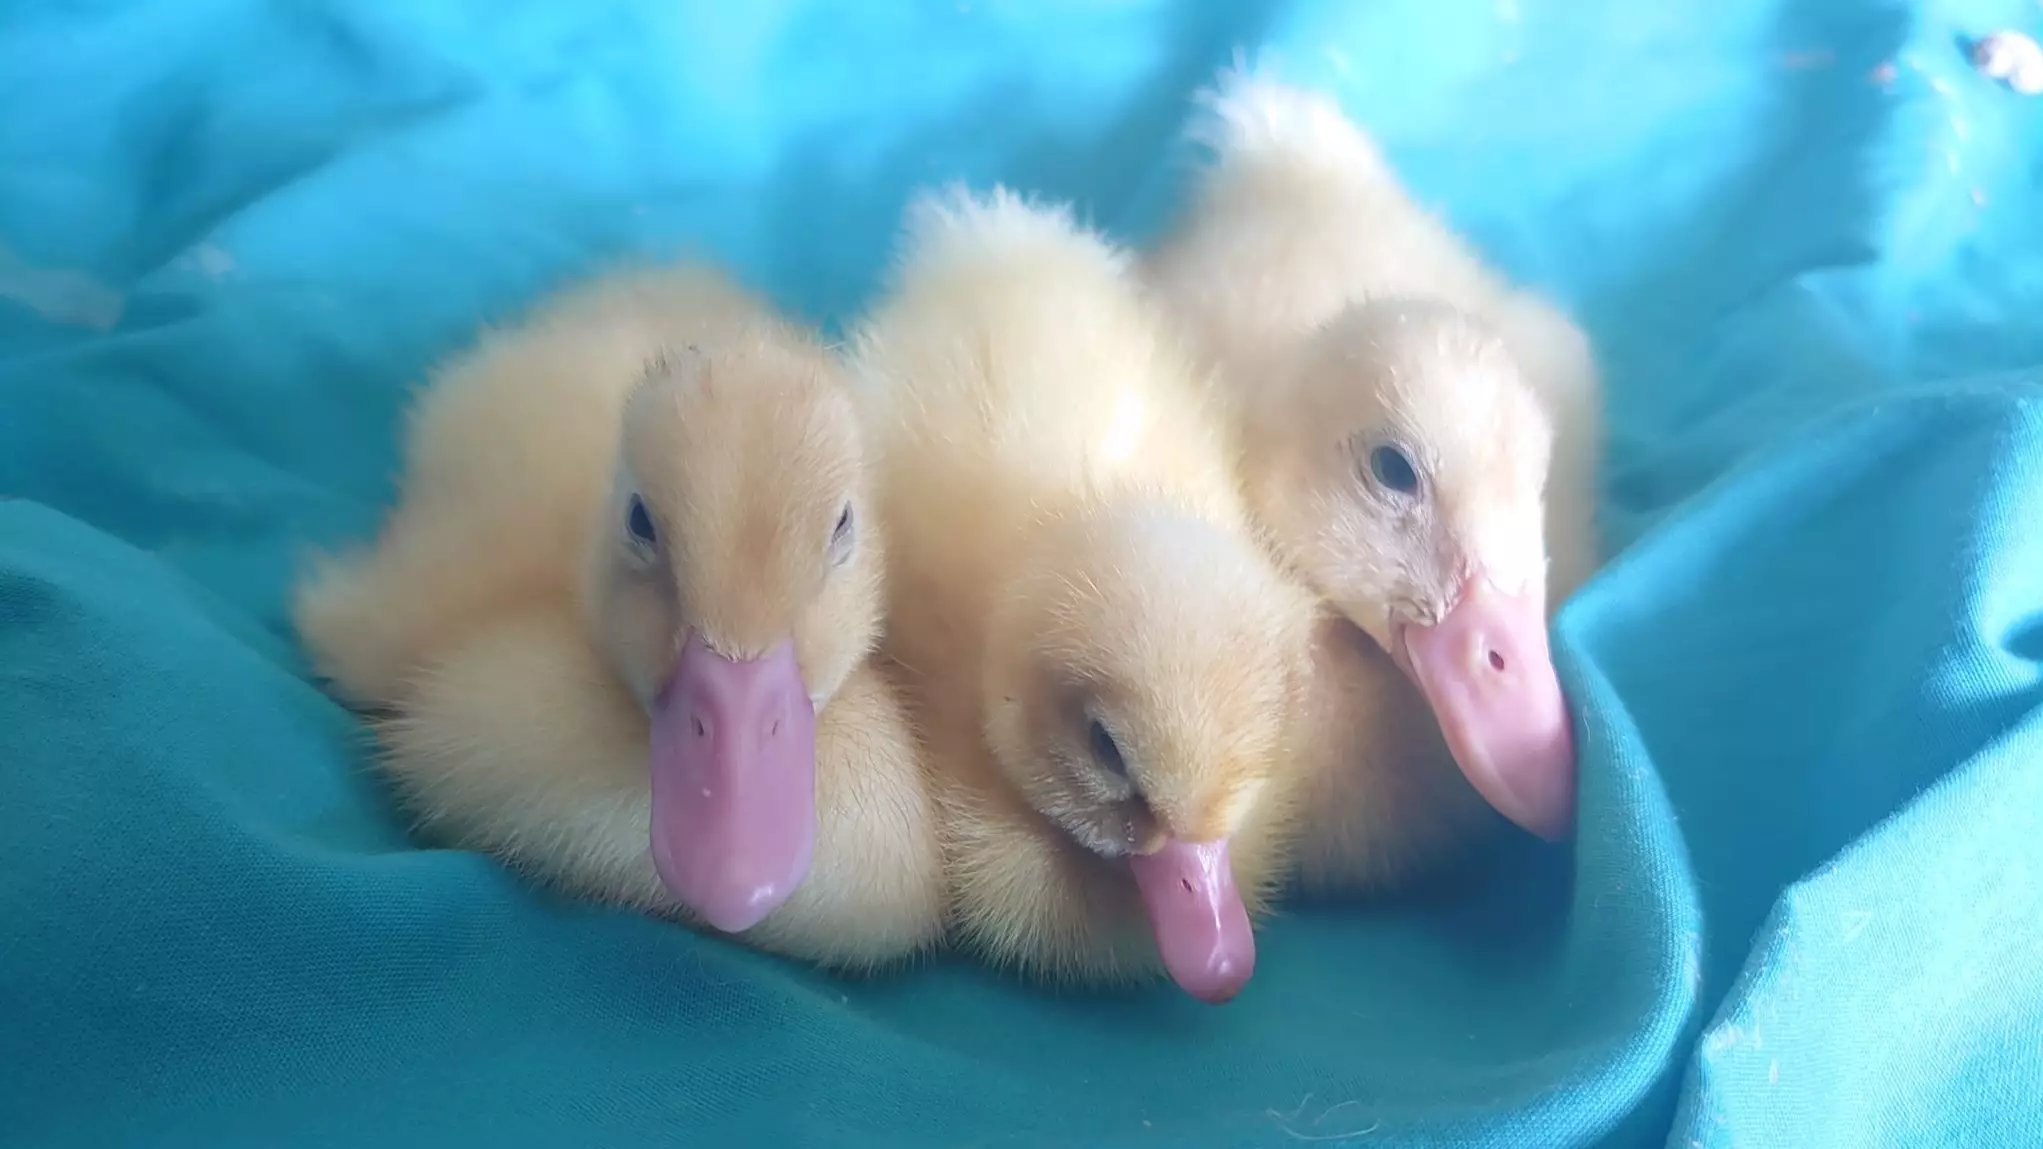 Woman Hatches Ducklings From A Pack Of Waitrose Eggs